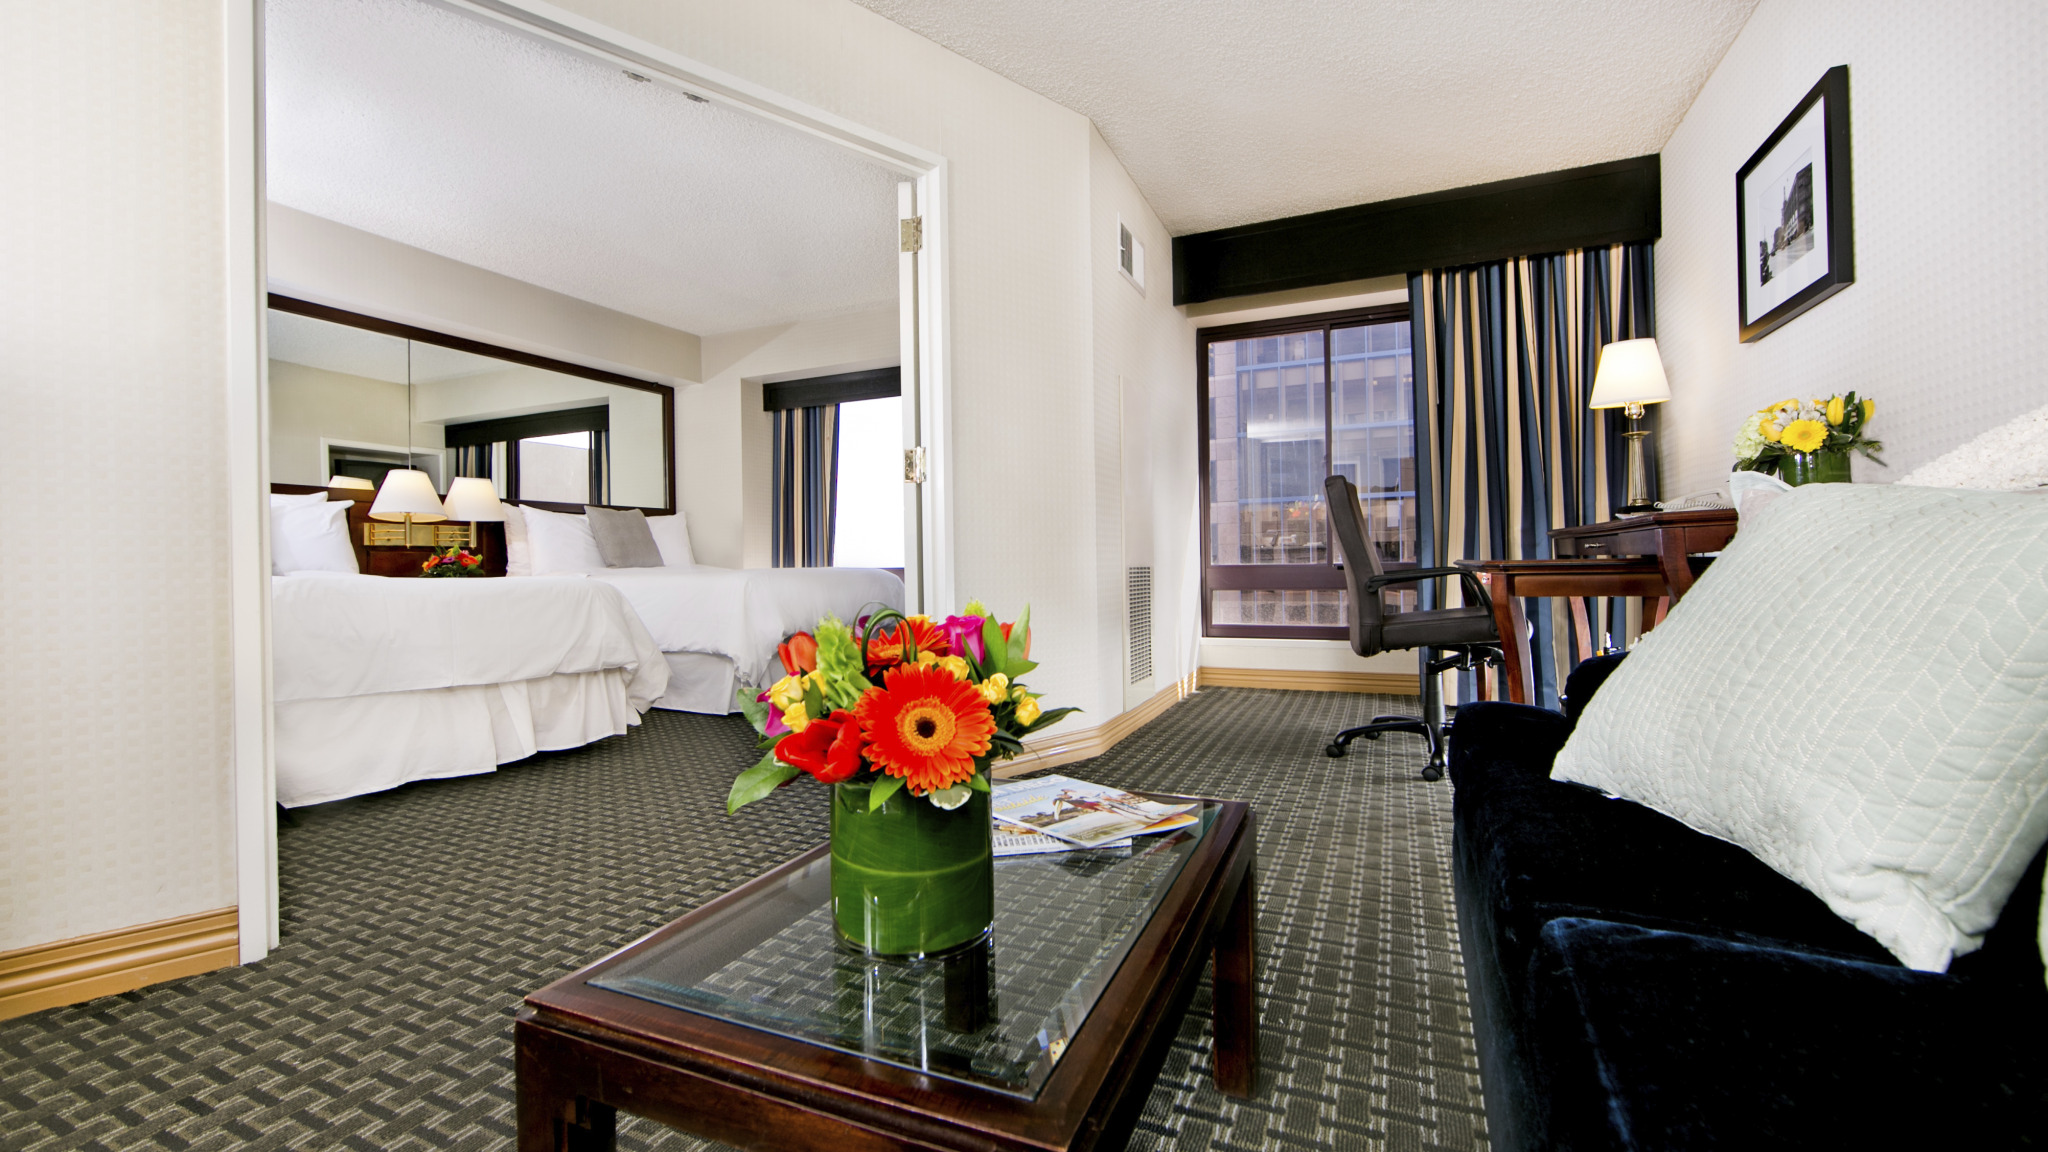 Declan Suites - A San Diego Hotel is located near popular restaurants in San Diego, including some of the newcomers.